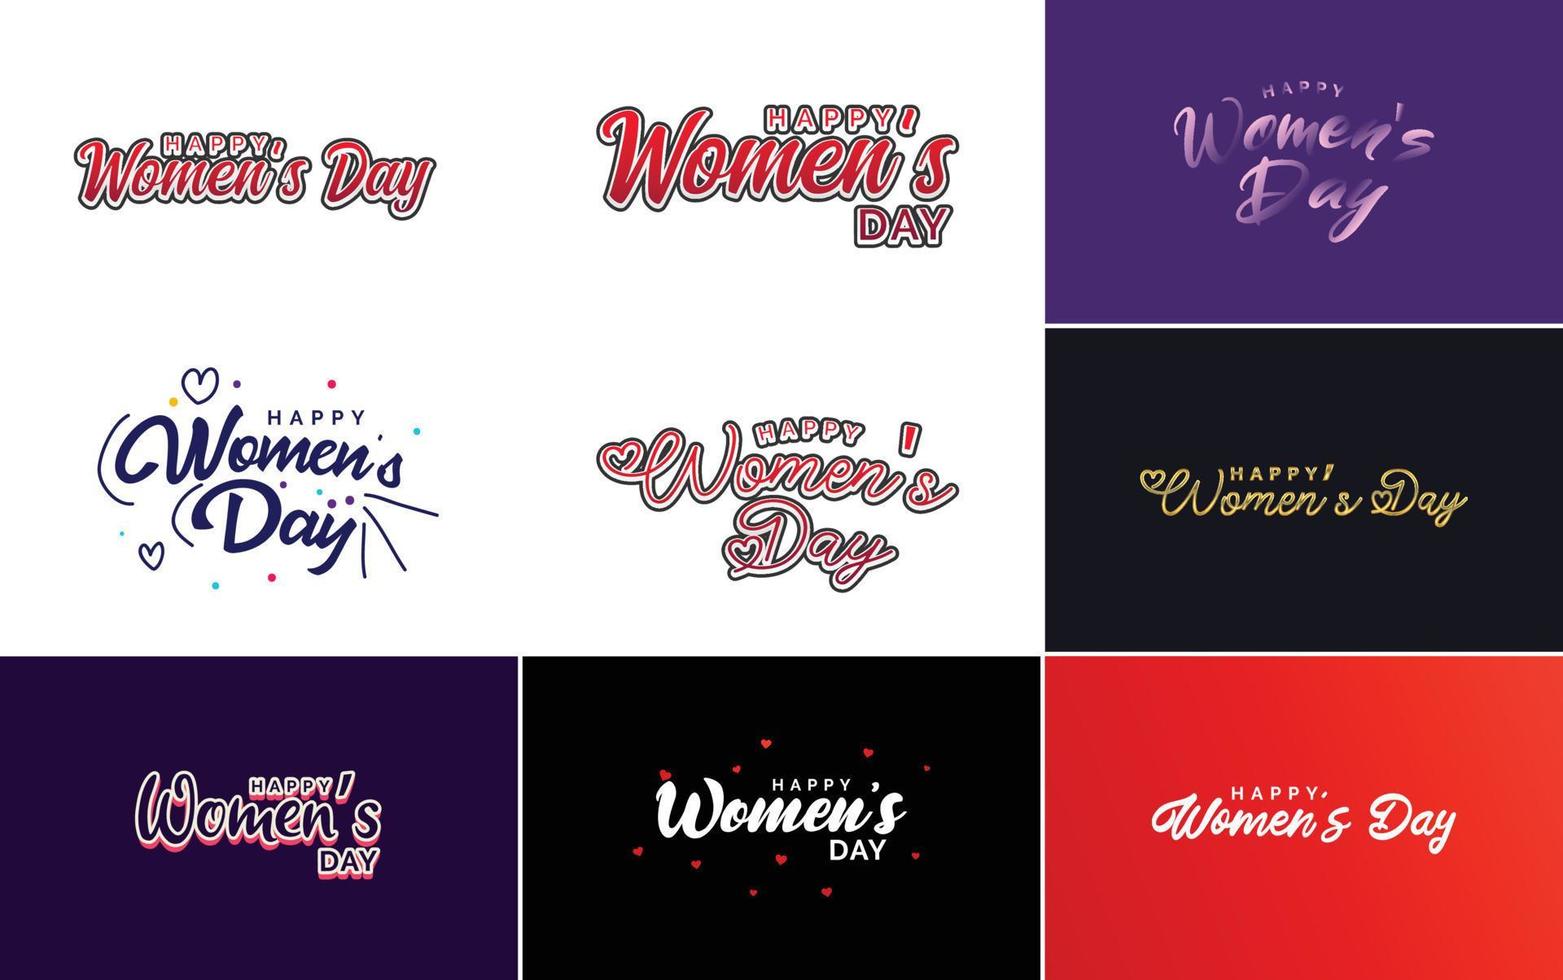 Set of International Women's Day cards with a logo and a gradient color scheme vector